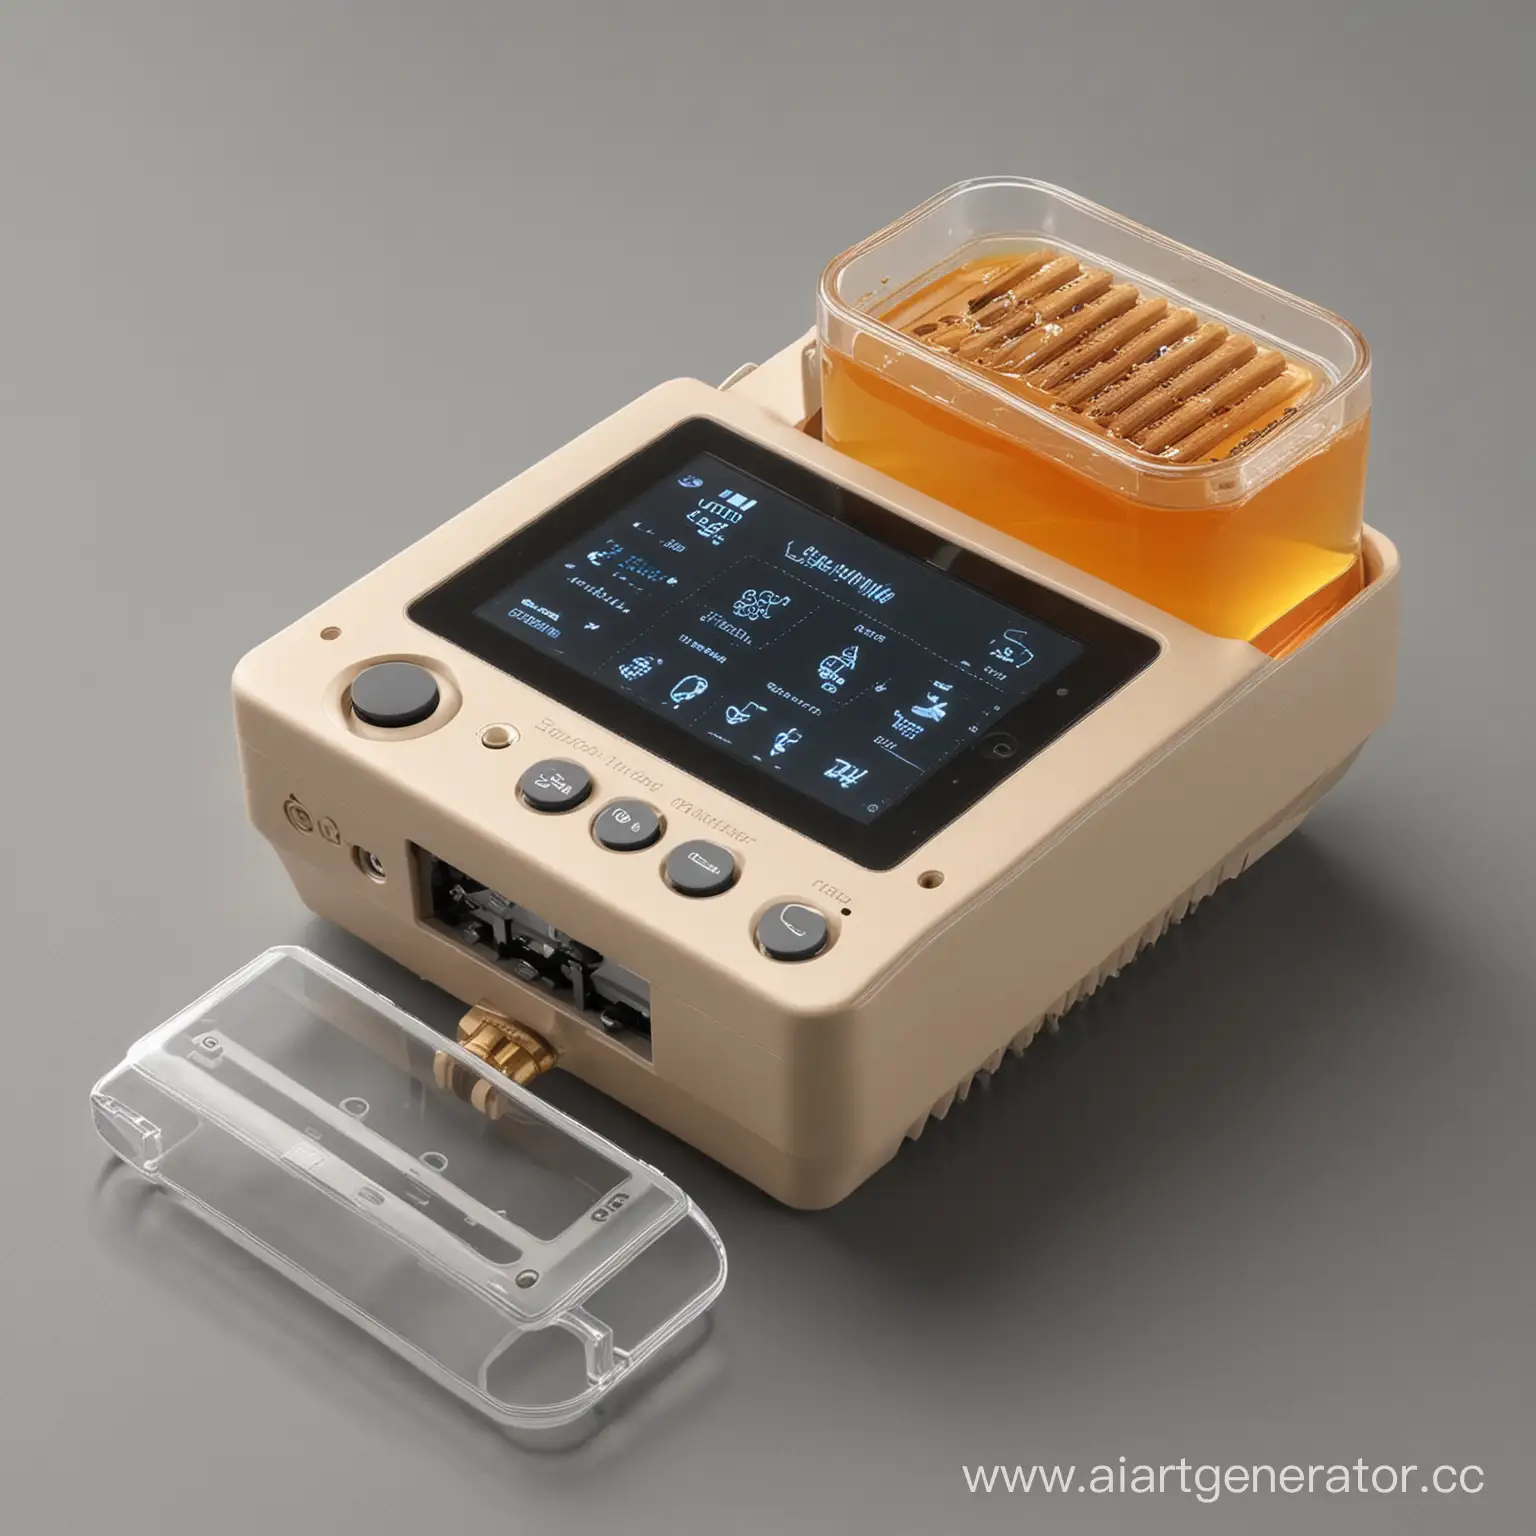 Digital-Honey-Quality-Testing-Device-with-LCD-Display-and-Barcode-Scanner